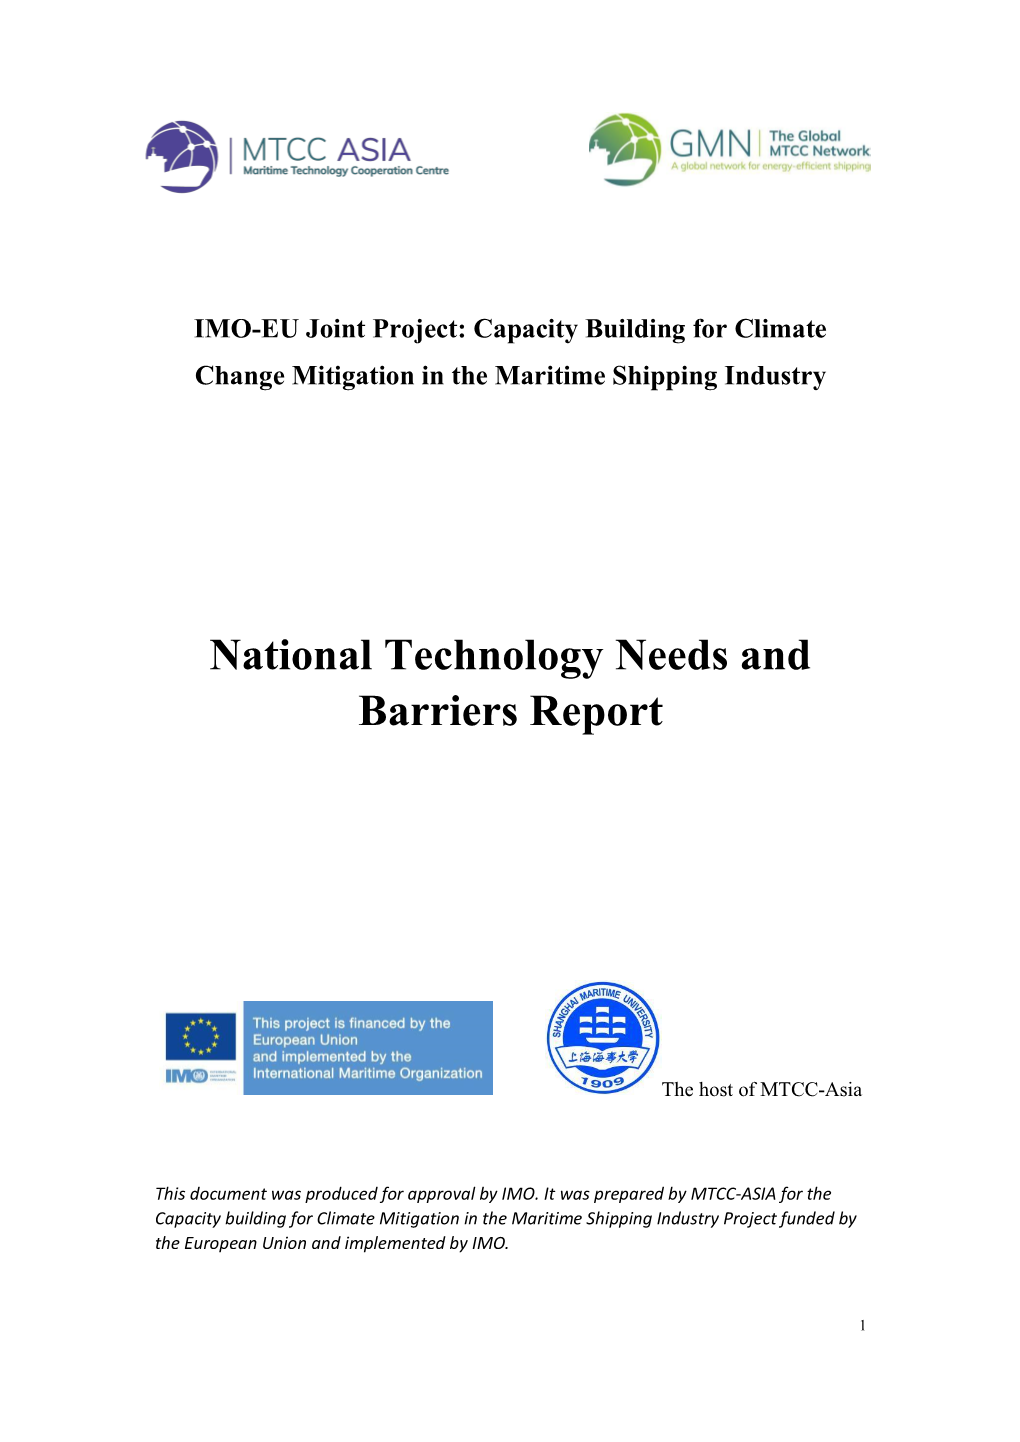 National Technology Needs and Barriers Report for Publication